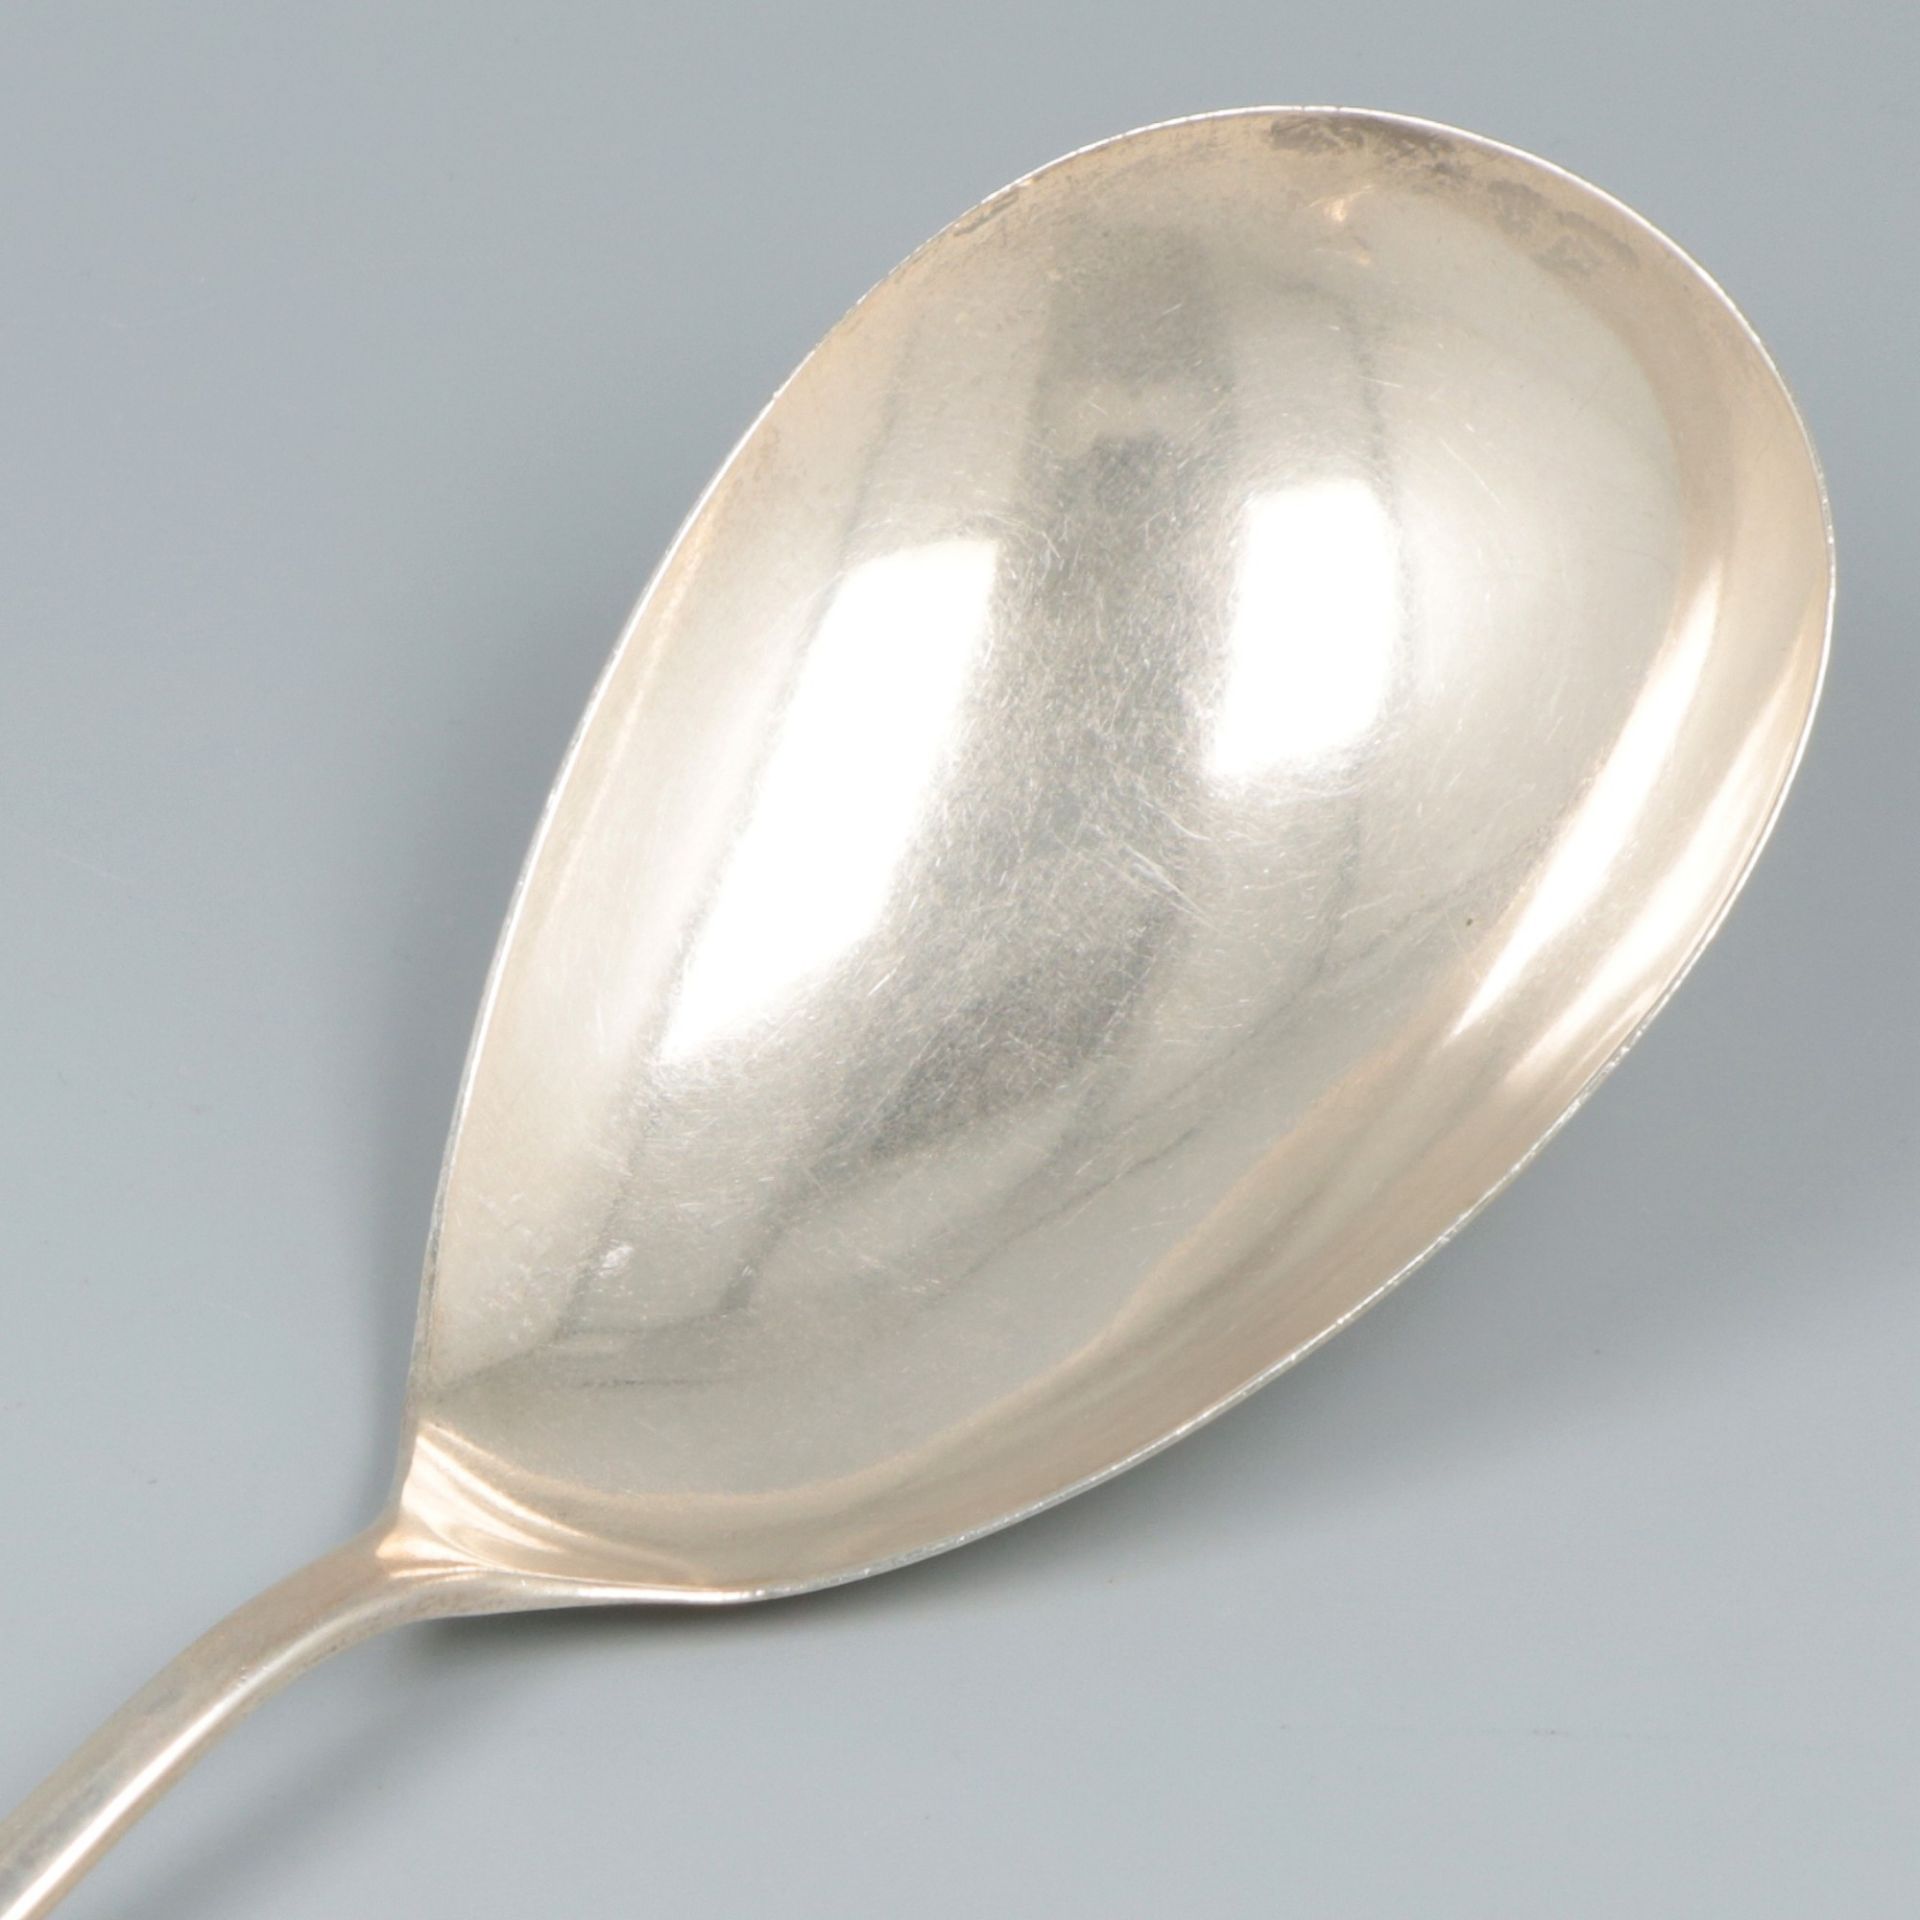 Rice serving spoon "Haags Lofje" silver. - Image 3 of 5